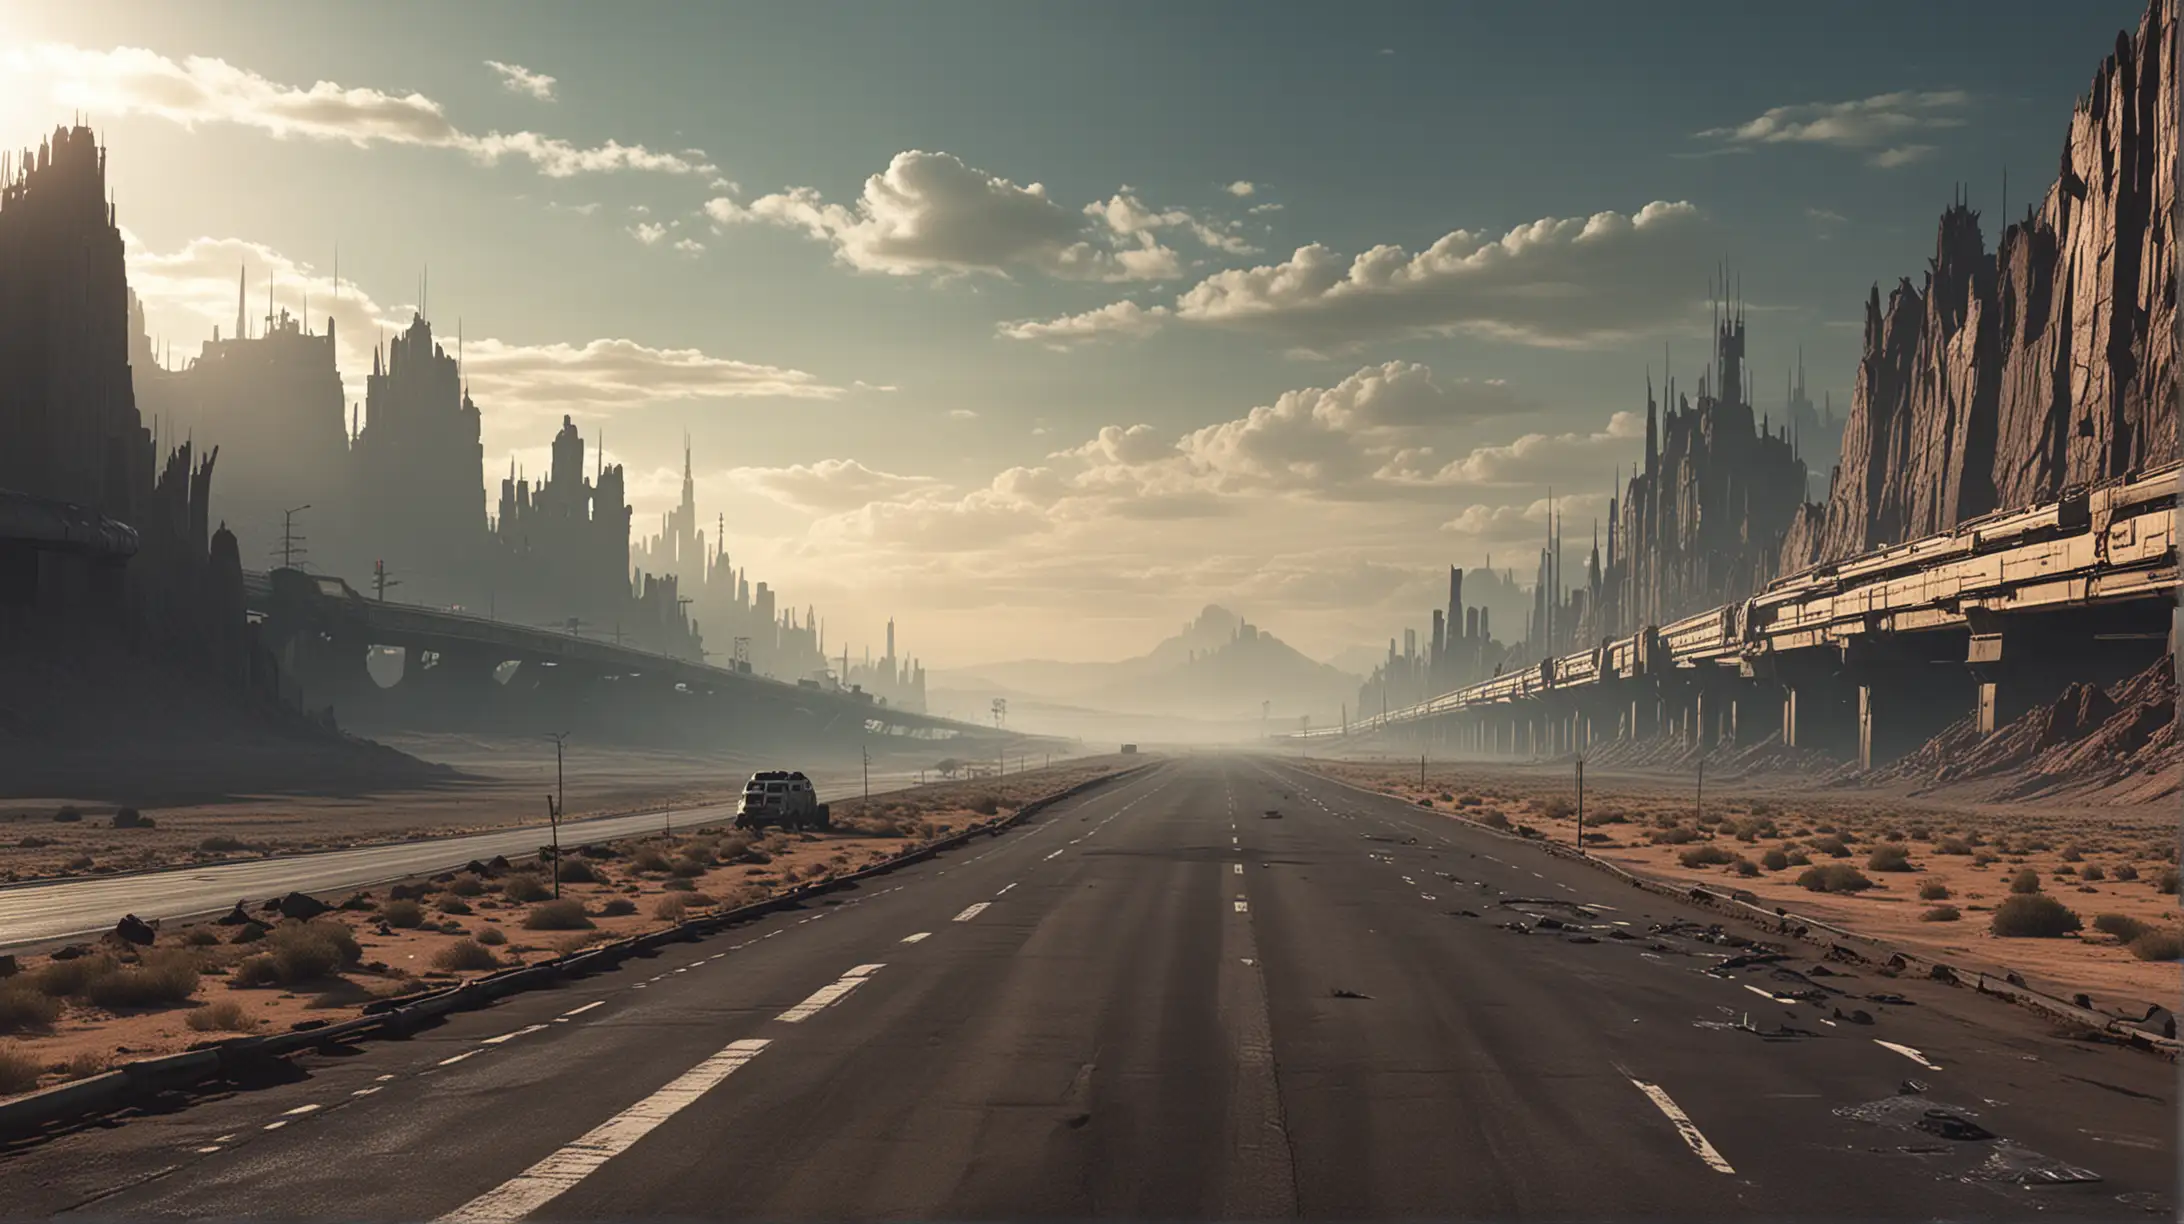 Futuristic SciFi Landscape with Long Highway in an Irradiated Wasteland